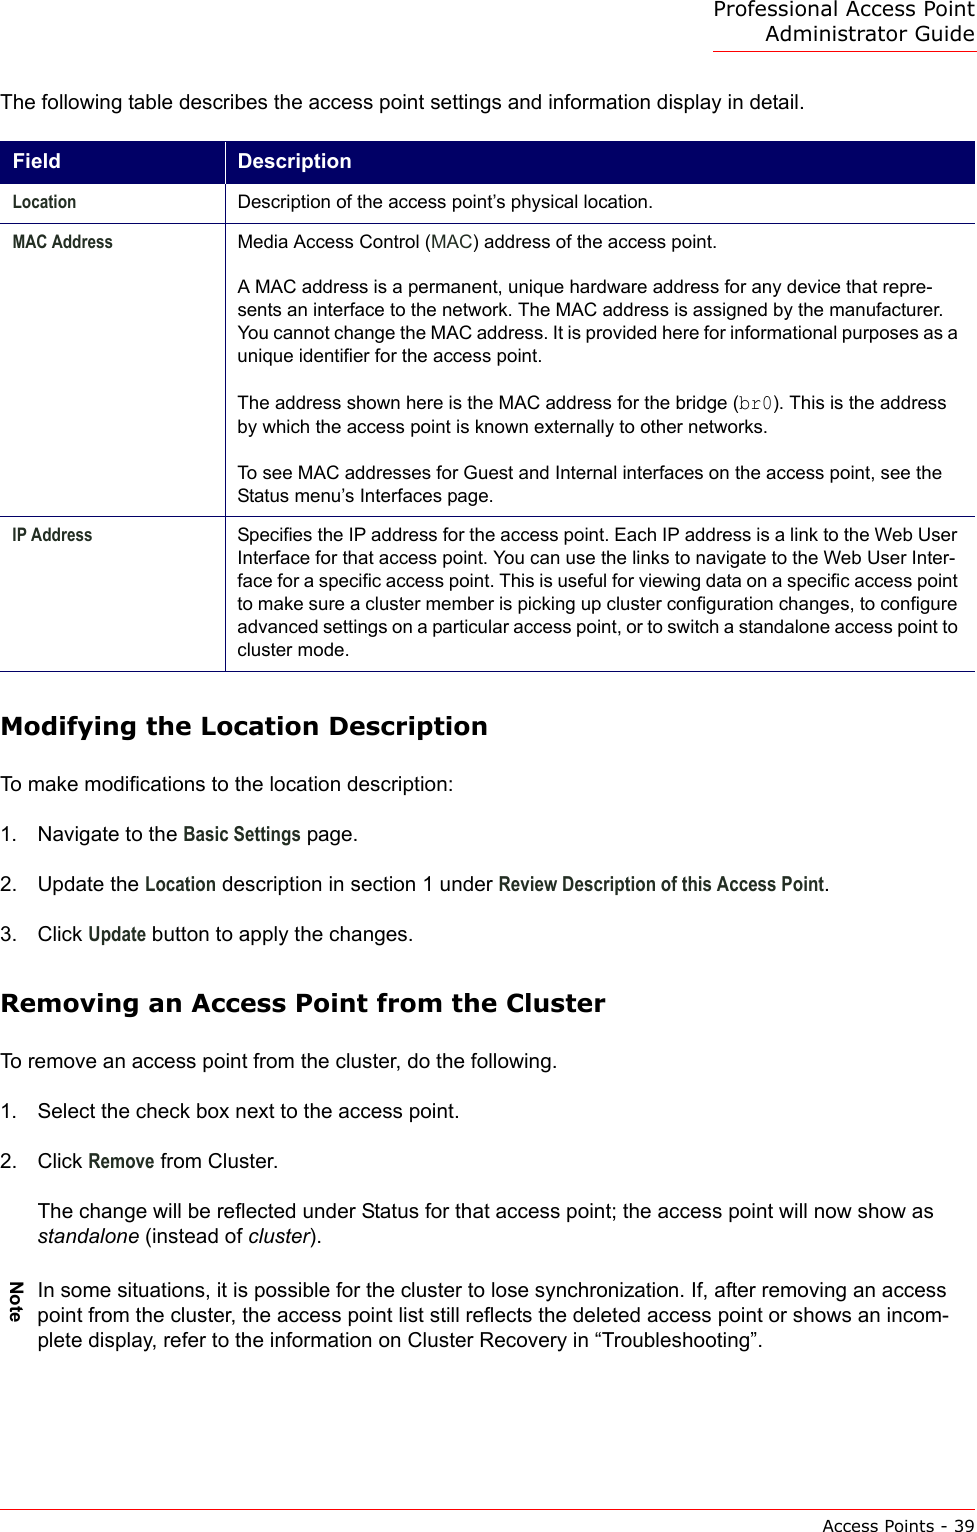 Professional Access Point Administrator GuideAccess Points - 39The following table describes the access point settings and information display in detail.Modifying the Location DescriptionTo make modifications to the location description:1. Navigate to the Basic Settings page.2. Update the Location description in section 1 under Review Description of this Access Point.3. Click Update button to apply the changes.Removing an Access Point from the ClusterTo remove an access point from the cluster, do the following.1. Select the check box next to the access point.2. Click Remove from Cluster.The change will be reflected under Status for that access point; the access point will now show as standalone (instead of cluster).Field DescriptionLocation Description of the access point’s physical location.MAC Address Media Access Control (MAC) address of the access point.A MAC address is a permanent, unique hardware address for any device that repre-sents an interface to the network. The MAC address is assigned by the manufacturer. You cannot change the MAC address. It is provided here for informational purposes as a unique identifier for the access point.The address shown here is the MAC address for the bridge (br0). This is the address by which the access point is known externally to other networks.To see MAC addresses for Guest and Internal interfaces on the access point, see the  Status menu’s Interfaces page.IP Address Specifies the IP address for the access point. Each IP address is a link to the Web User Interface for that access point. You can use the links to navigate to the Web User Inter-face for a specific access point. This is useful for viewing data on a specific access point to make sure a cluster member is picking up cluster configuration changes, to configure advanced settings on a particular access point, or to switch a standalone access point to cluster mode.NoteIn some situations, it is possible for the cluster to lose synchronization. If, after removing an access point from the cluster, the access point list still reflects the deleted access point or shows an incom-plete display, refer to the information on Cluster Recovery in “Troubleshooting”.